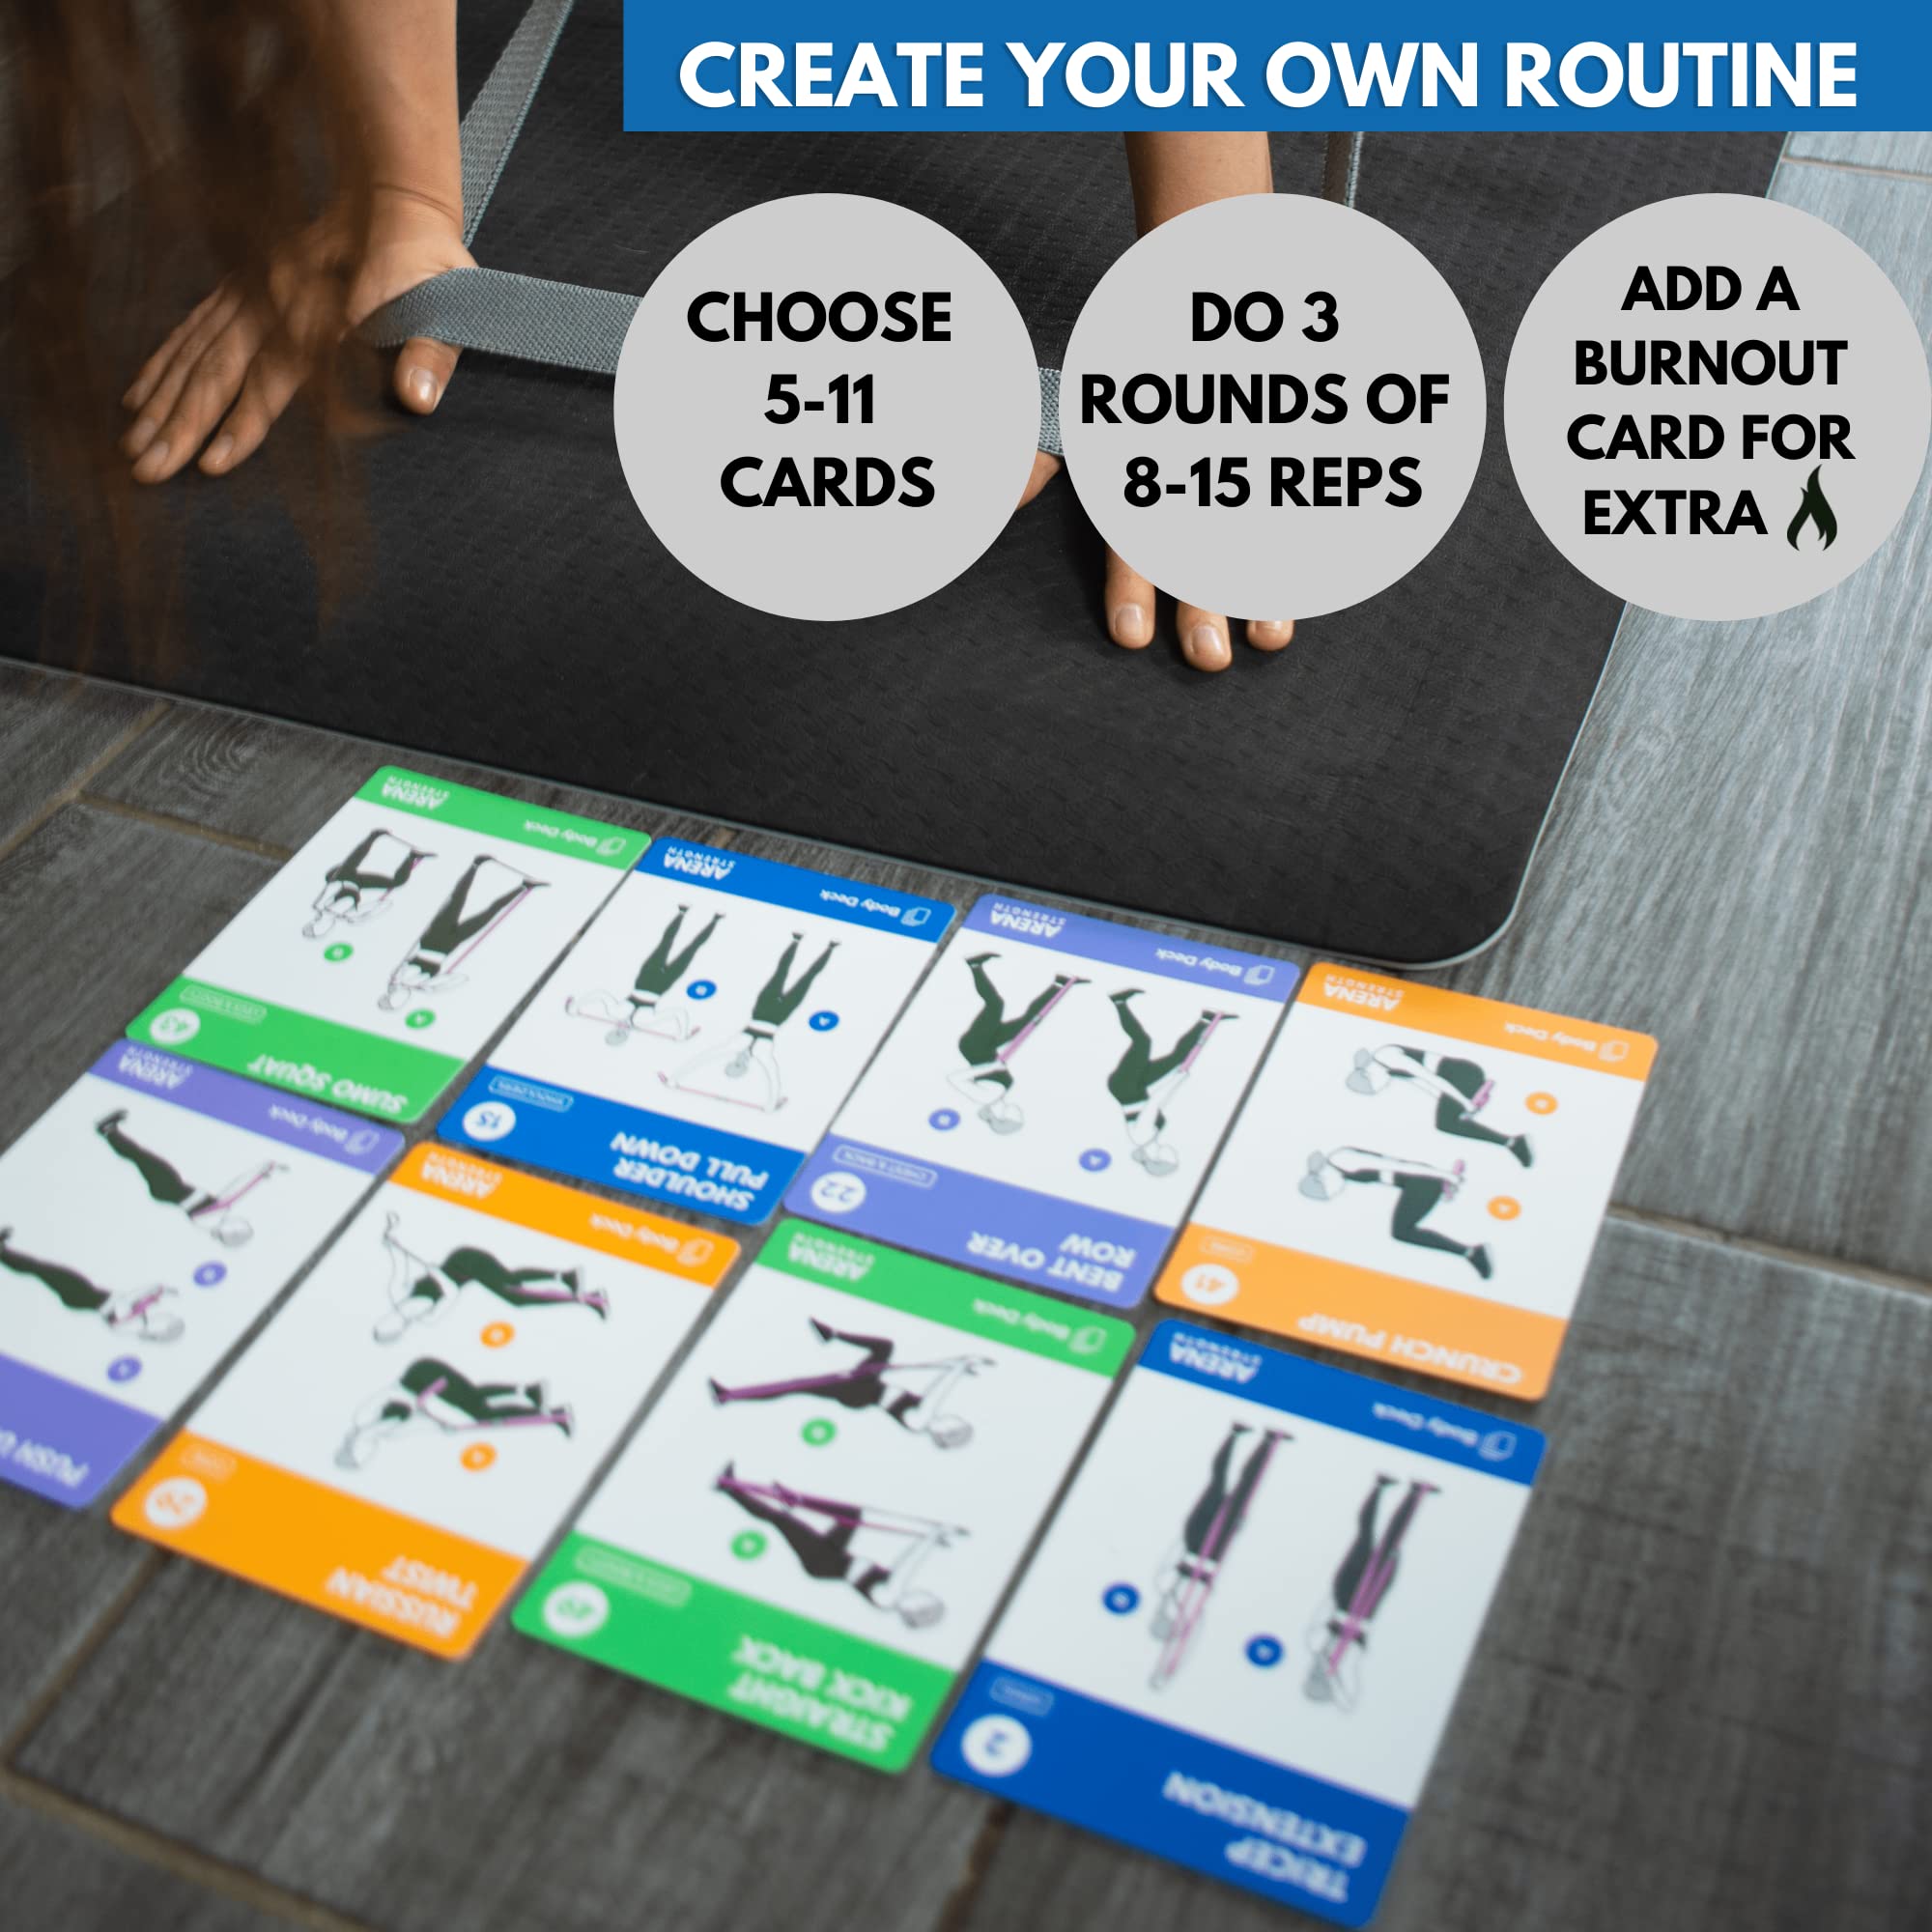 Arena Strength Band Fitness Workout Cards- Instructional Fitness Deck for Resistance Band Workouts, Beginner Fitness Guide for Resistance Band Training Exercises at Home. Includes Workout Routines.